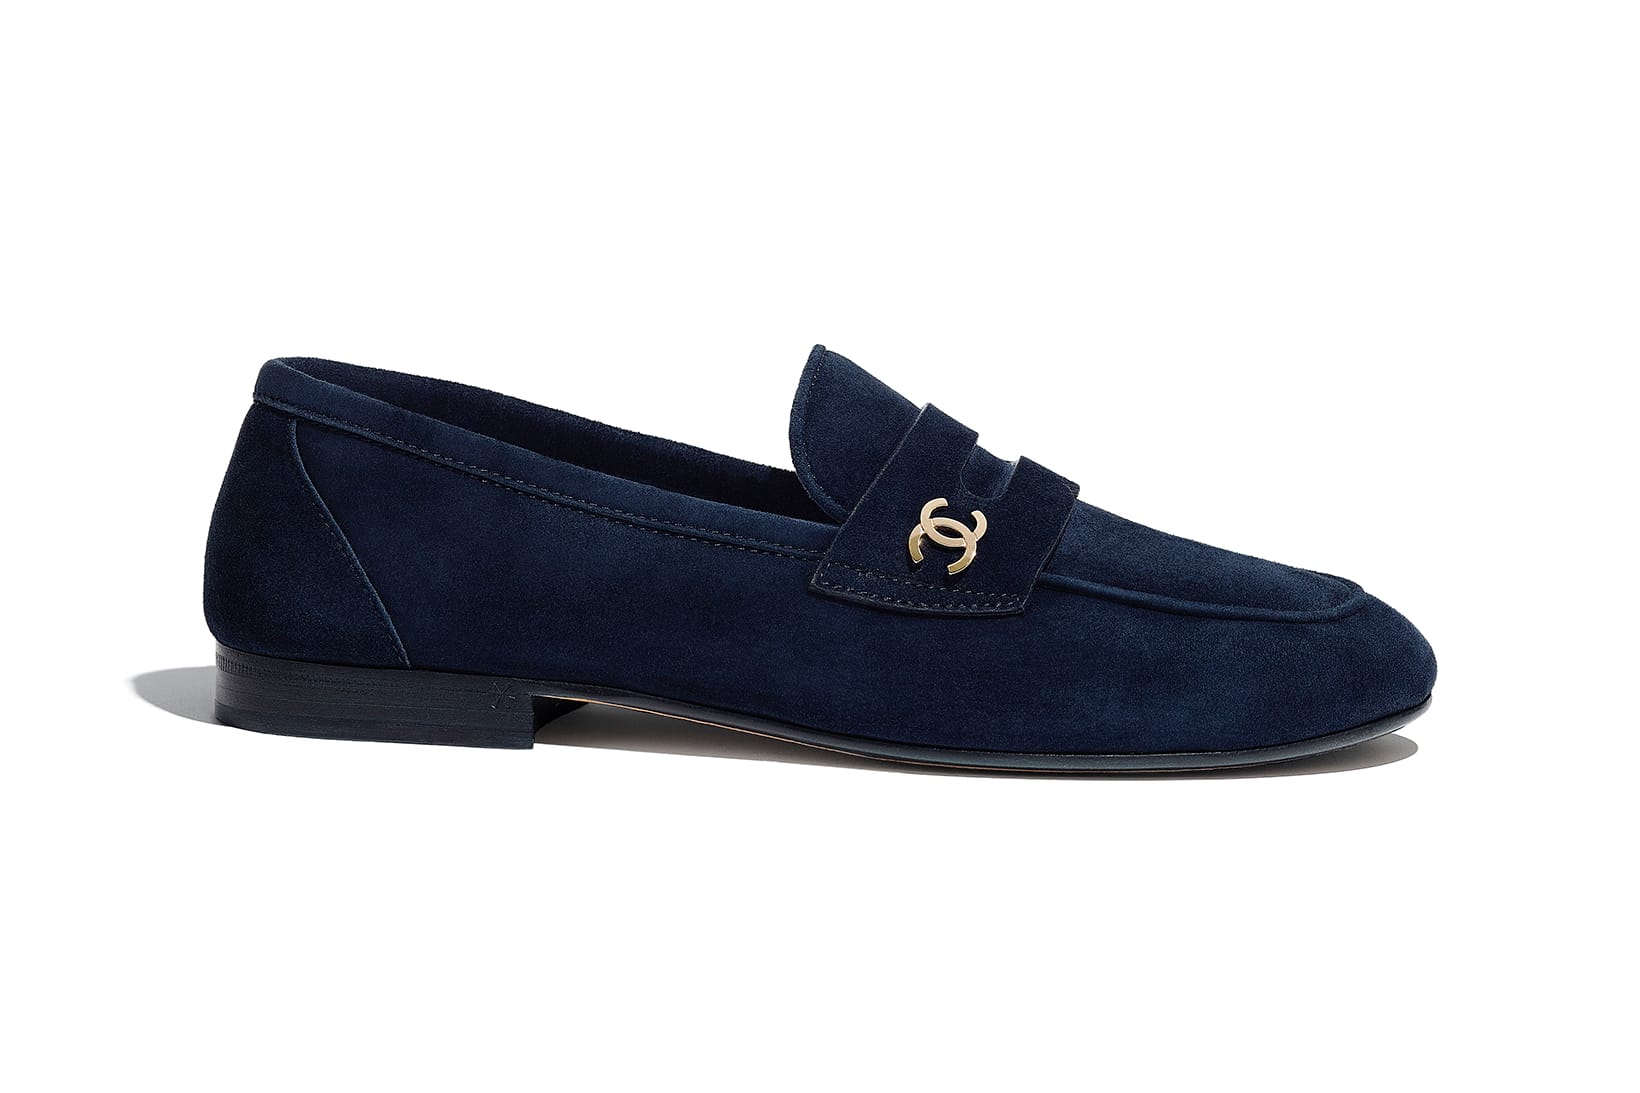 Chanel's SS21 Loafers Feature Gold Logo 